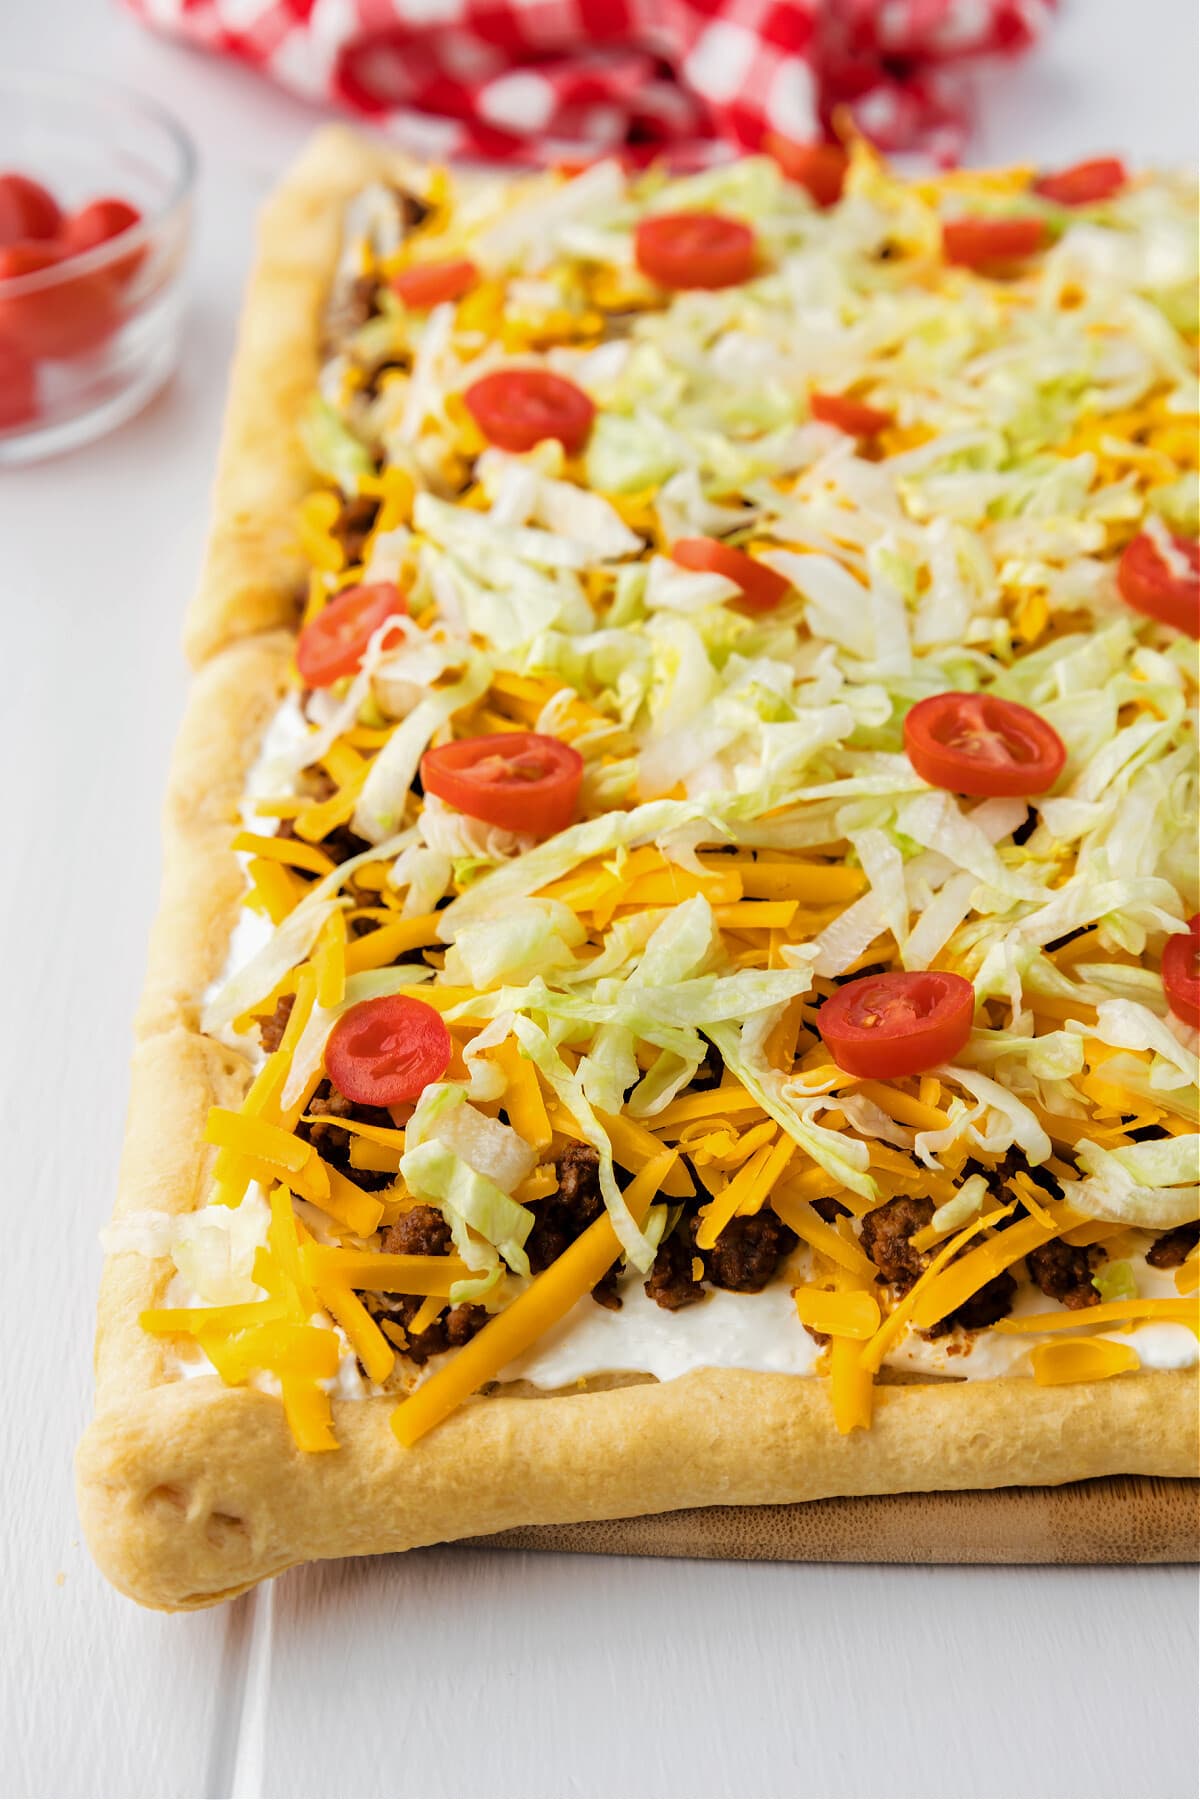 taco pizza with lettuce, tomatoes and cheese on cutting board